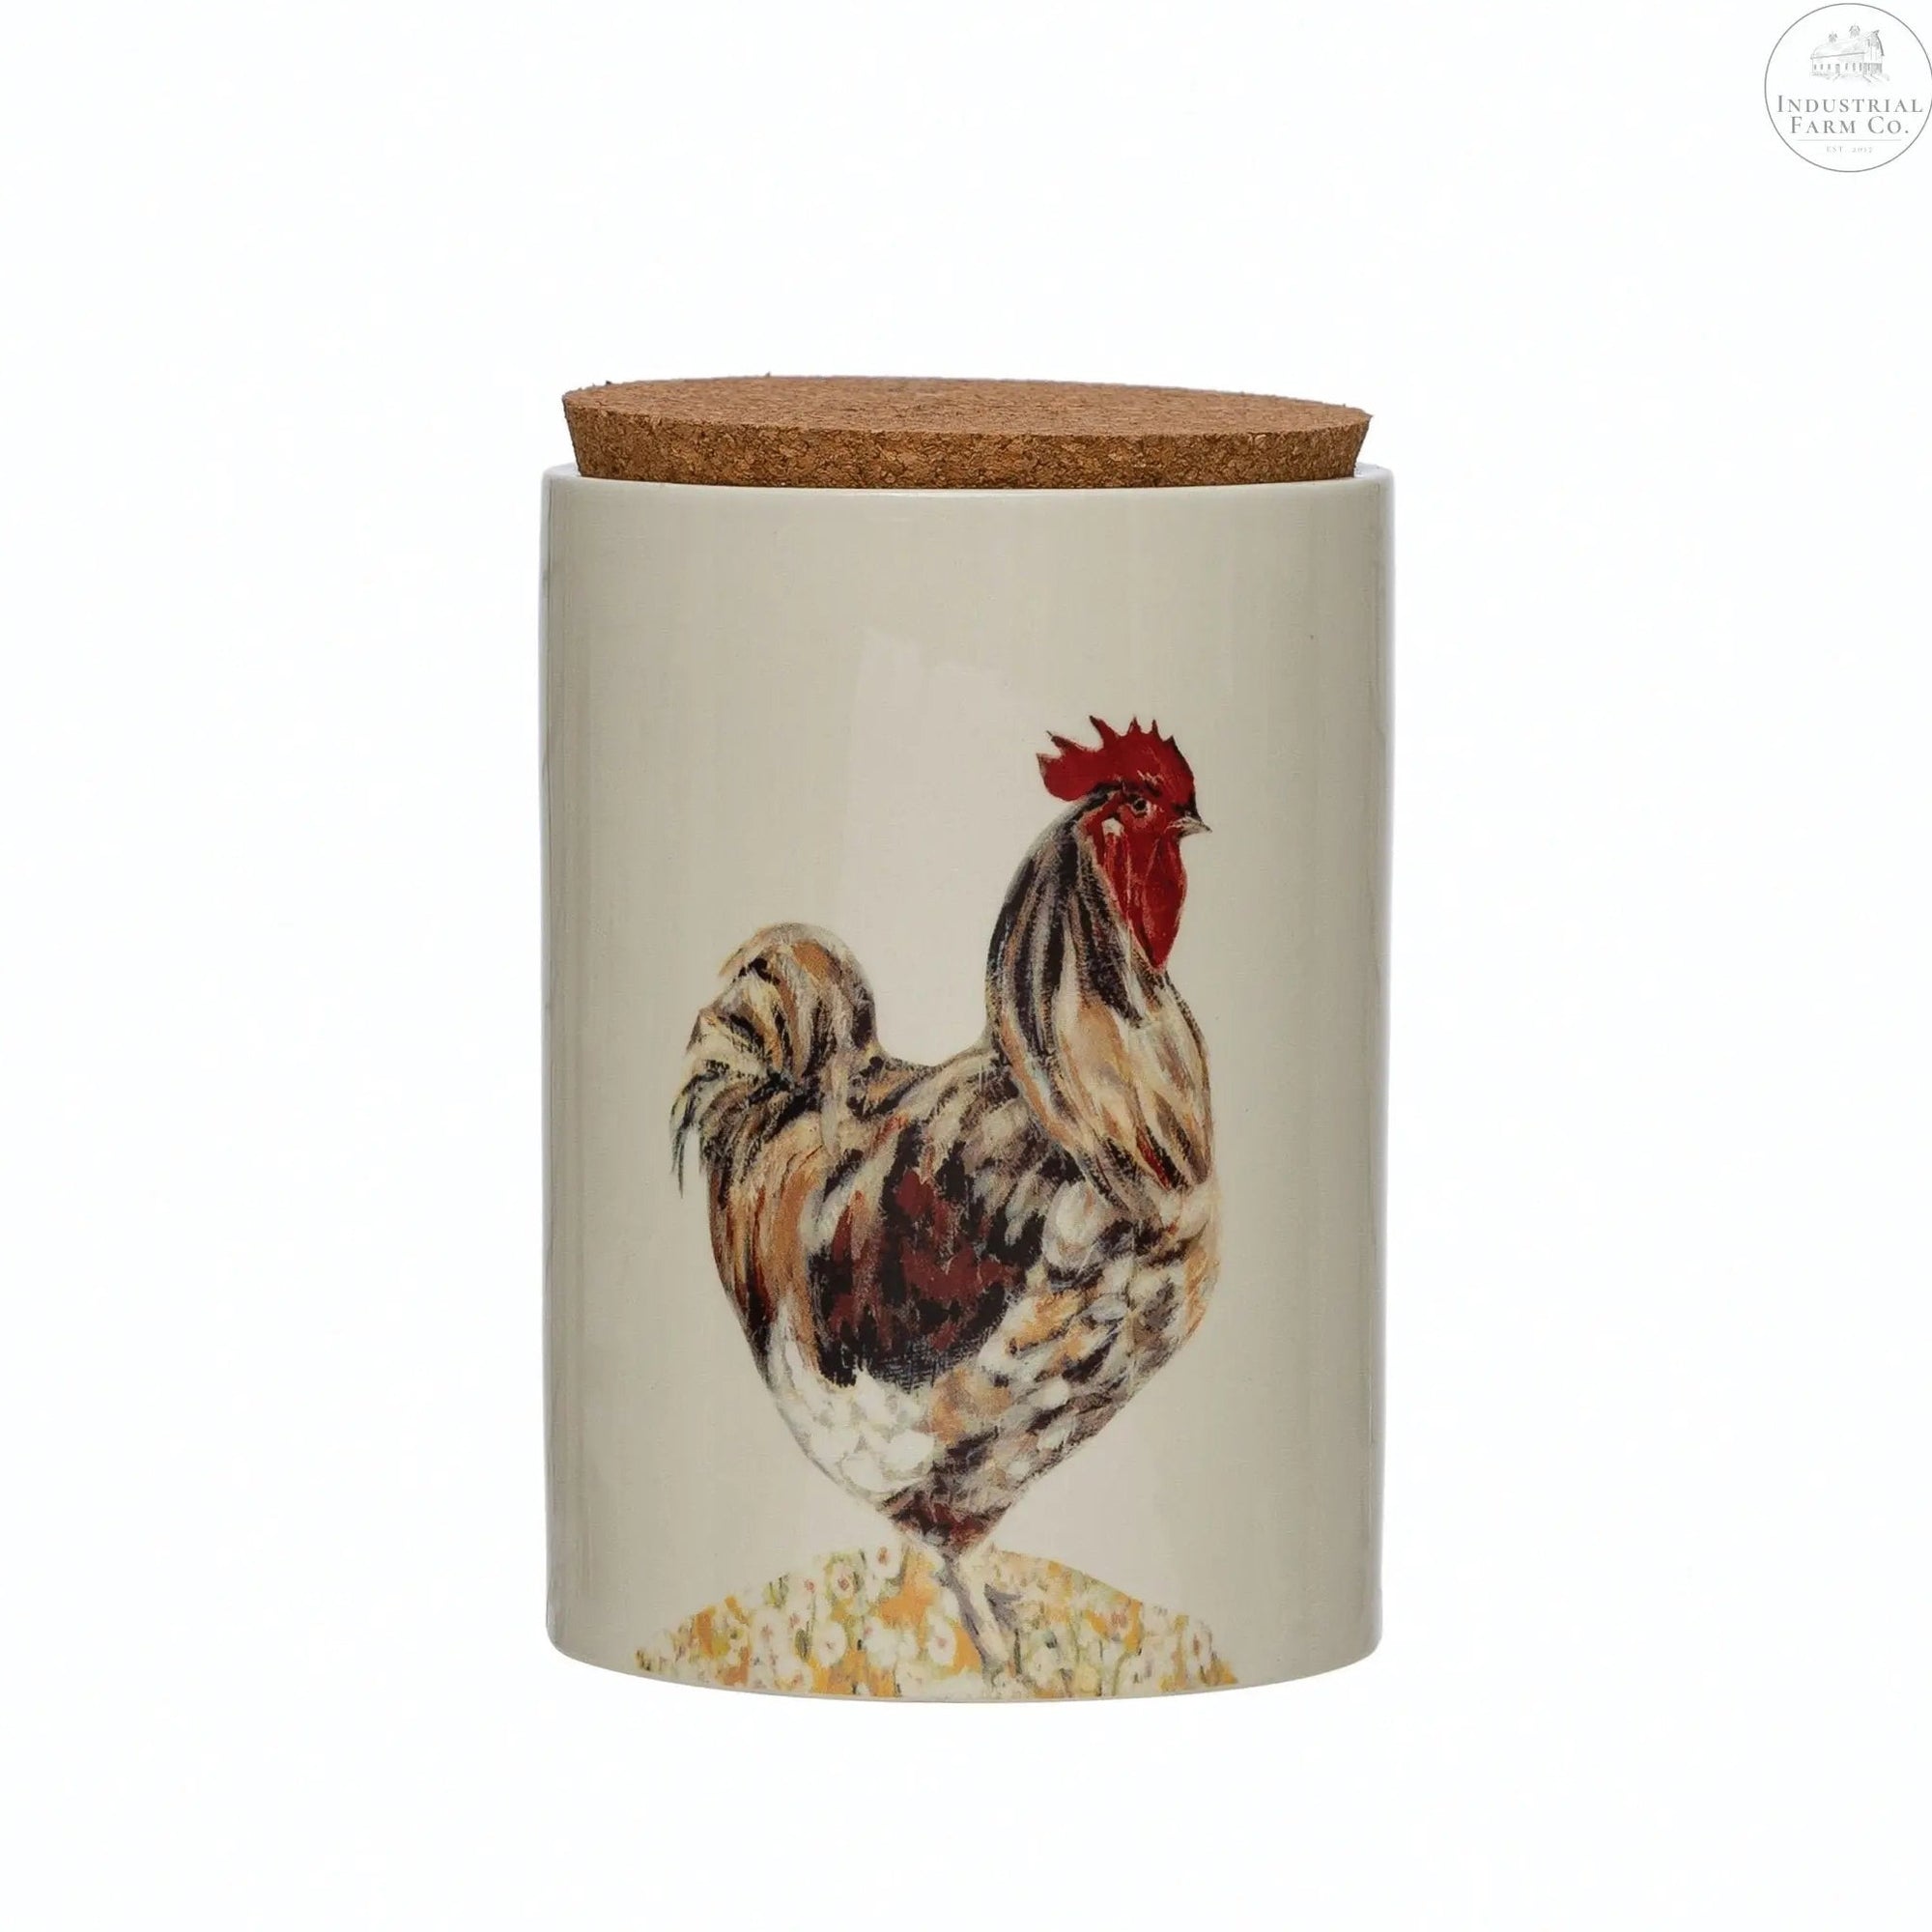 Farmhouse Rooster Canister     | Industrial Farm Co